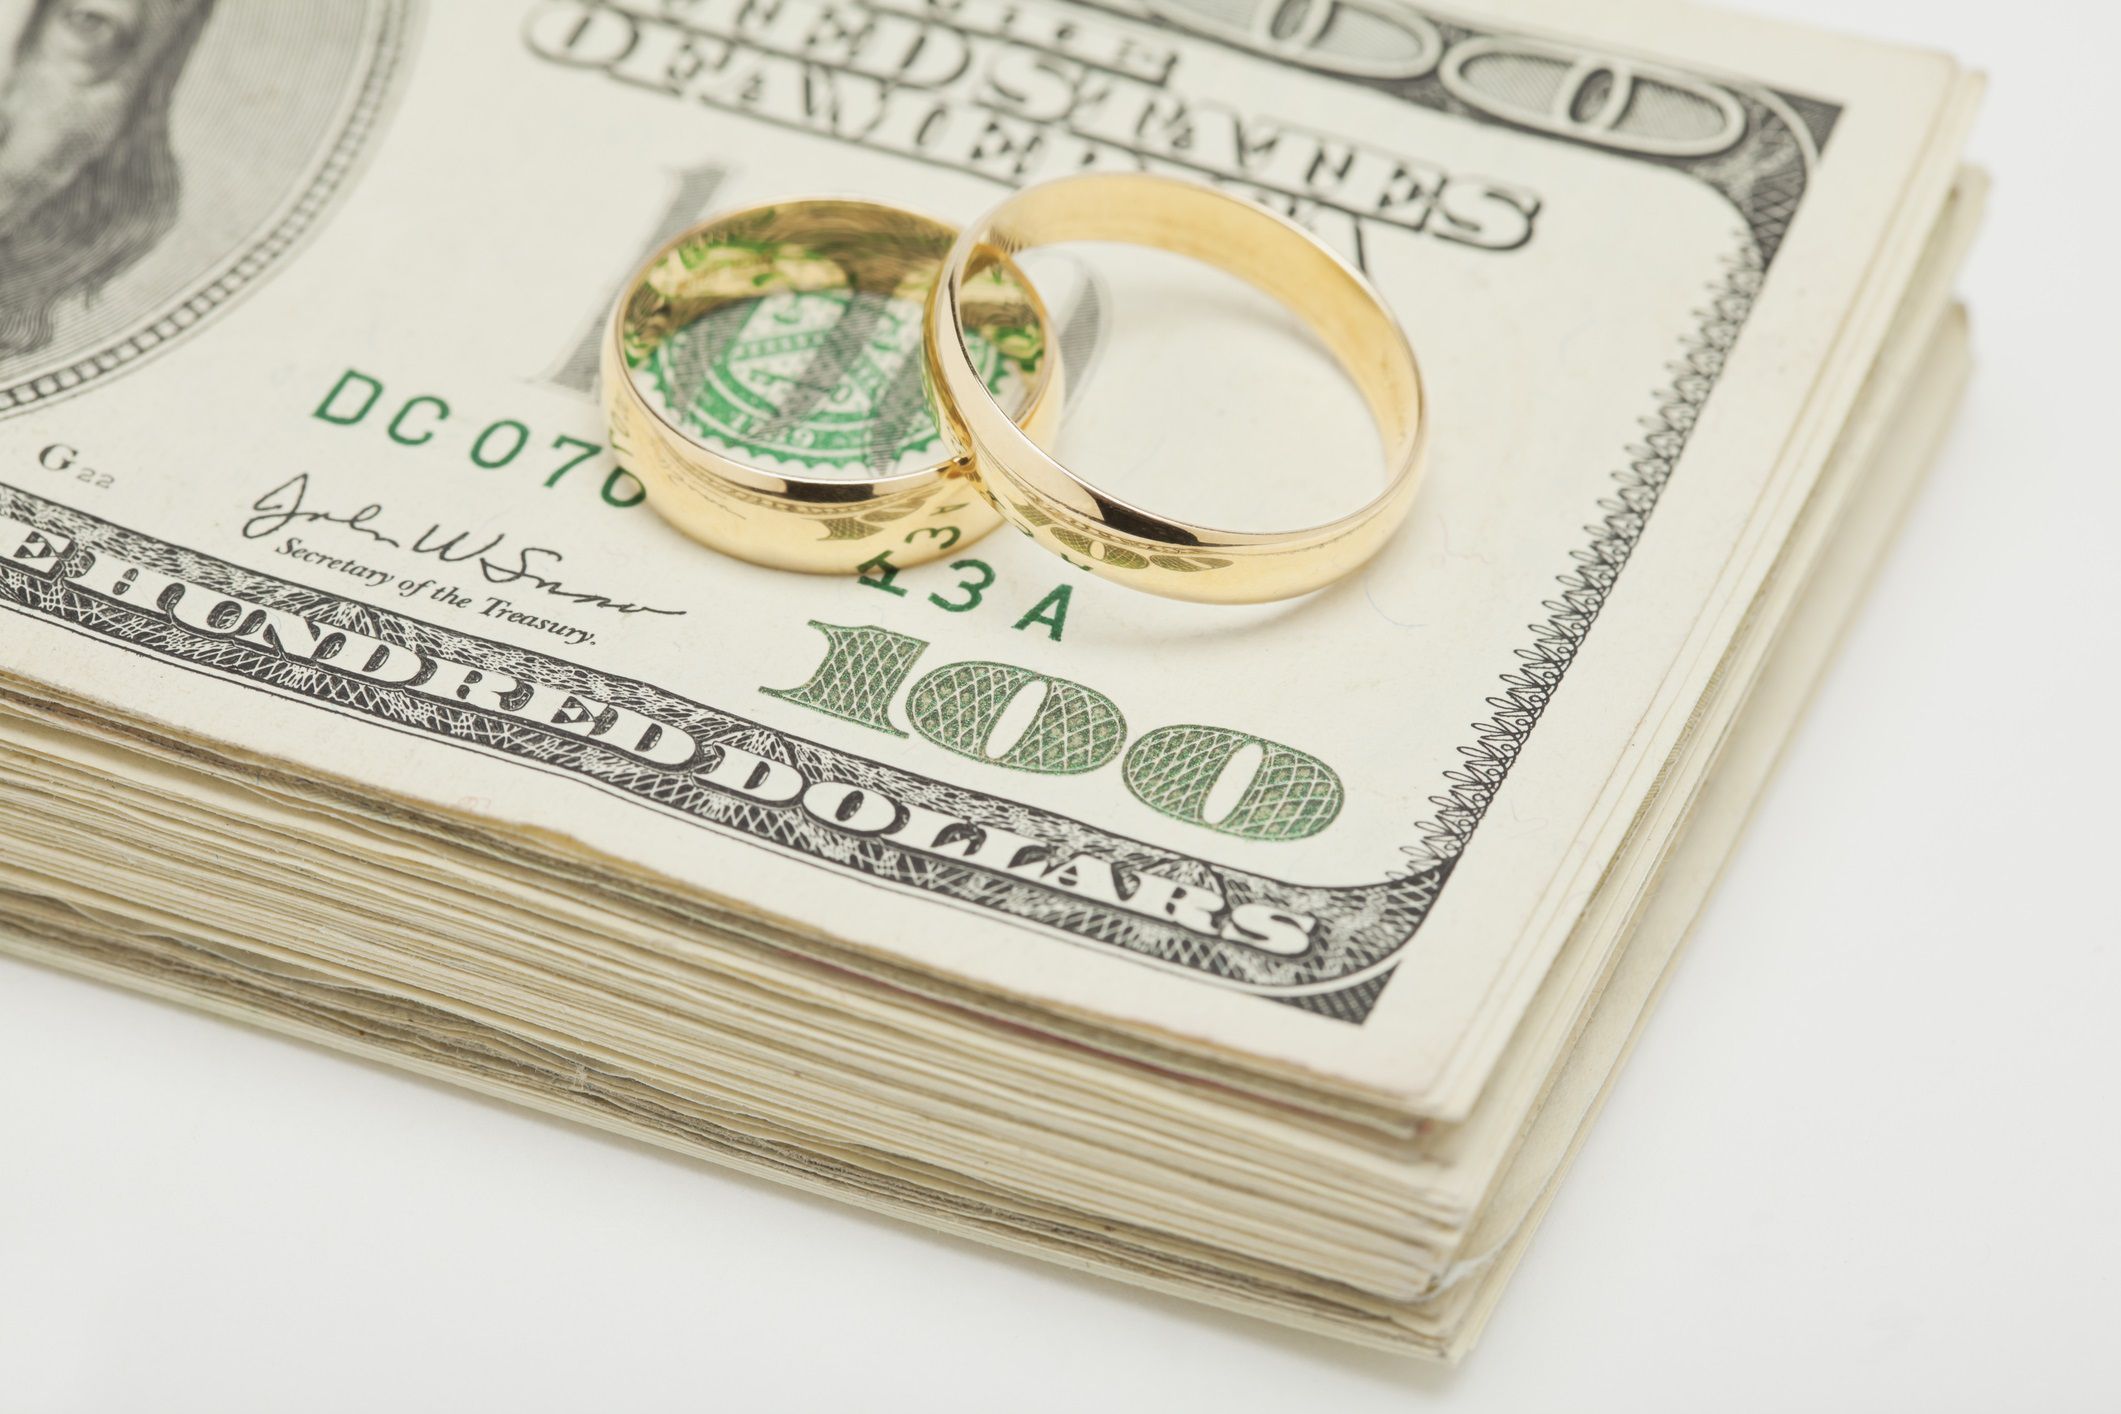 Is a Dowry Still Given for a Marriage 